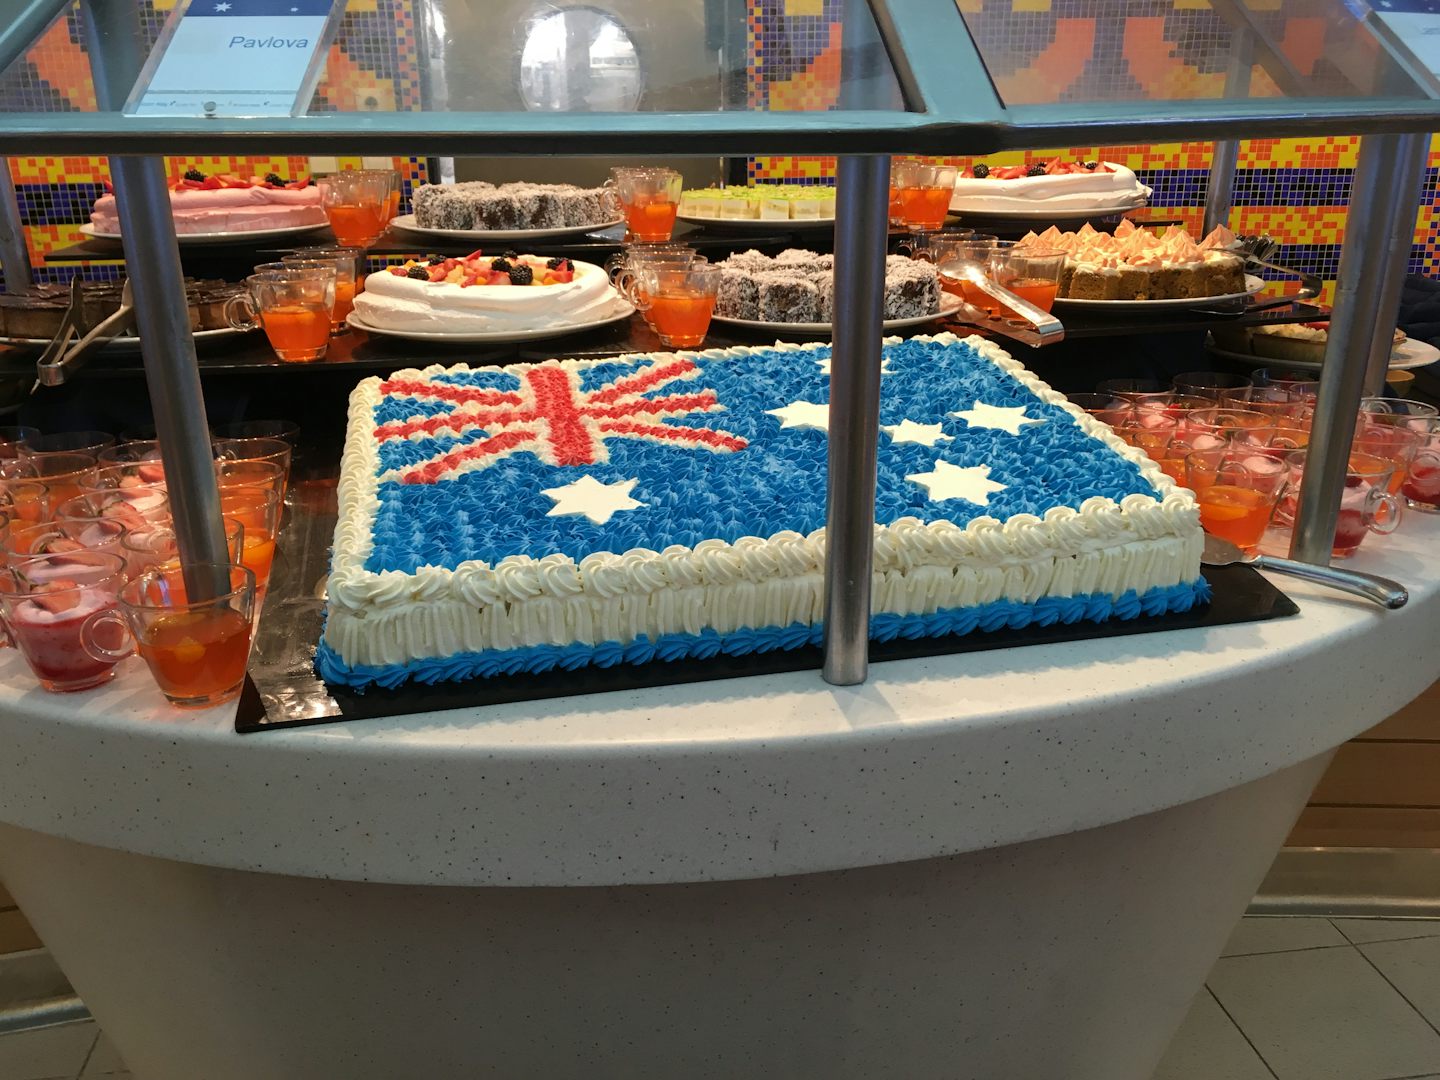 Australia cake made as there were so many Aussie on board